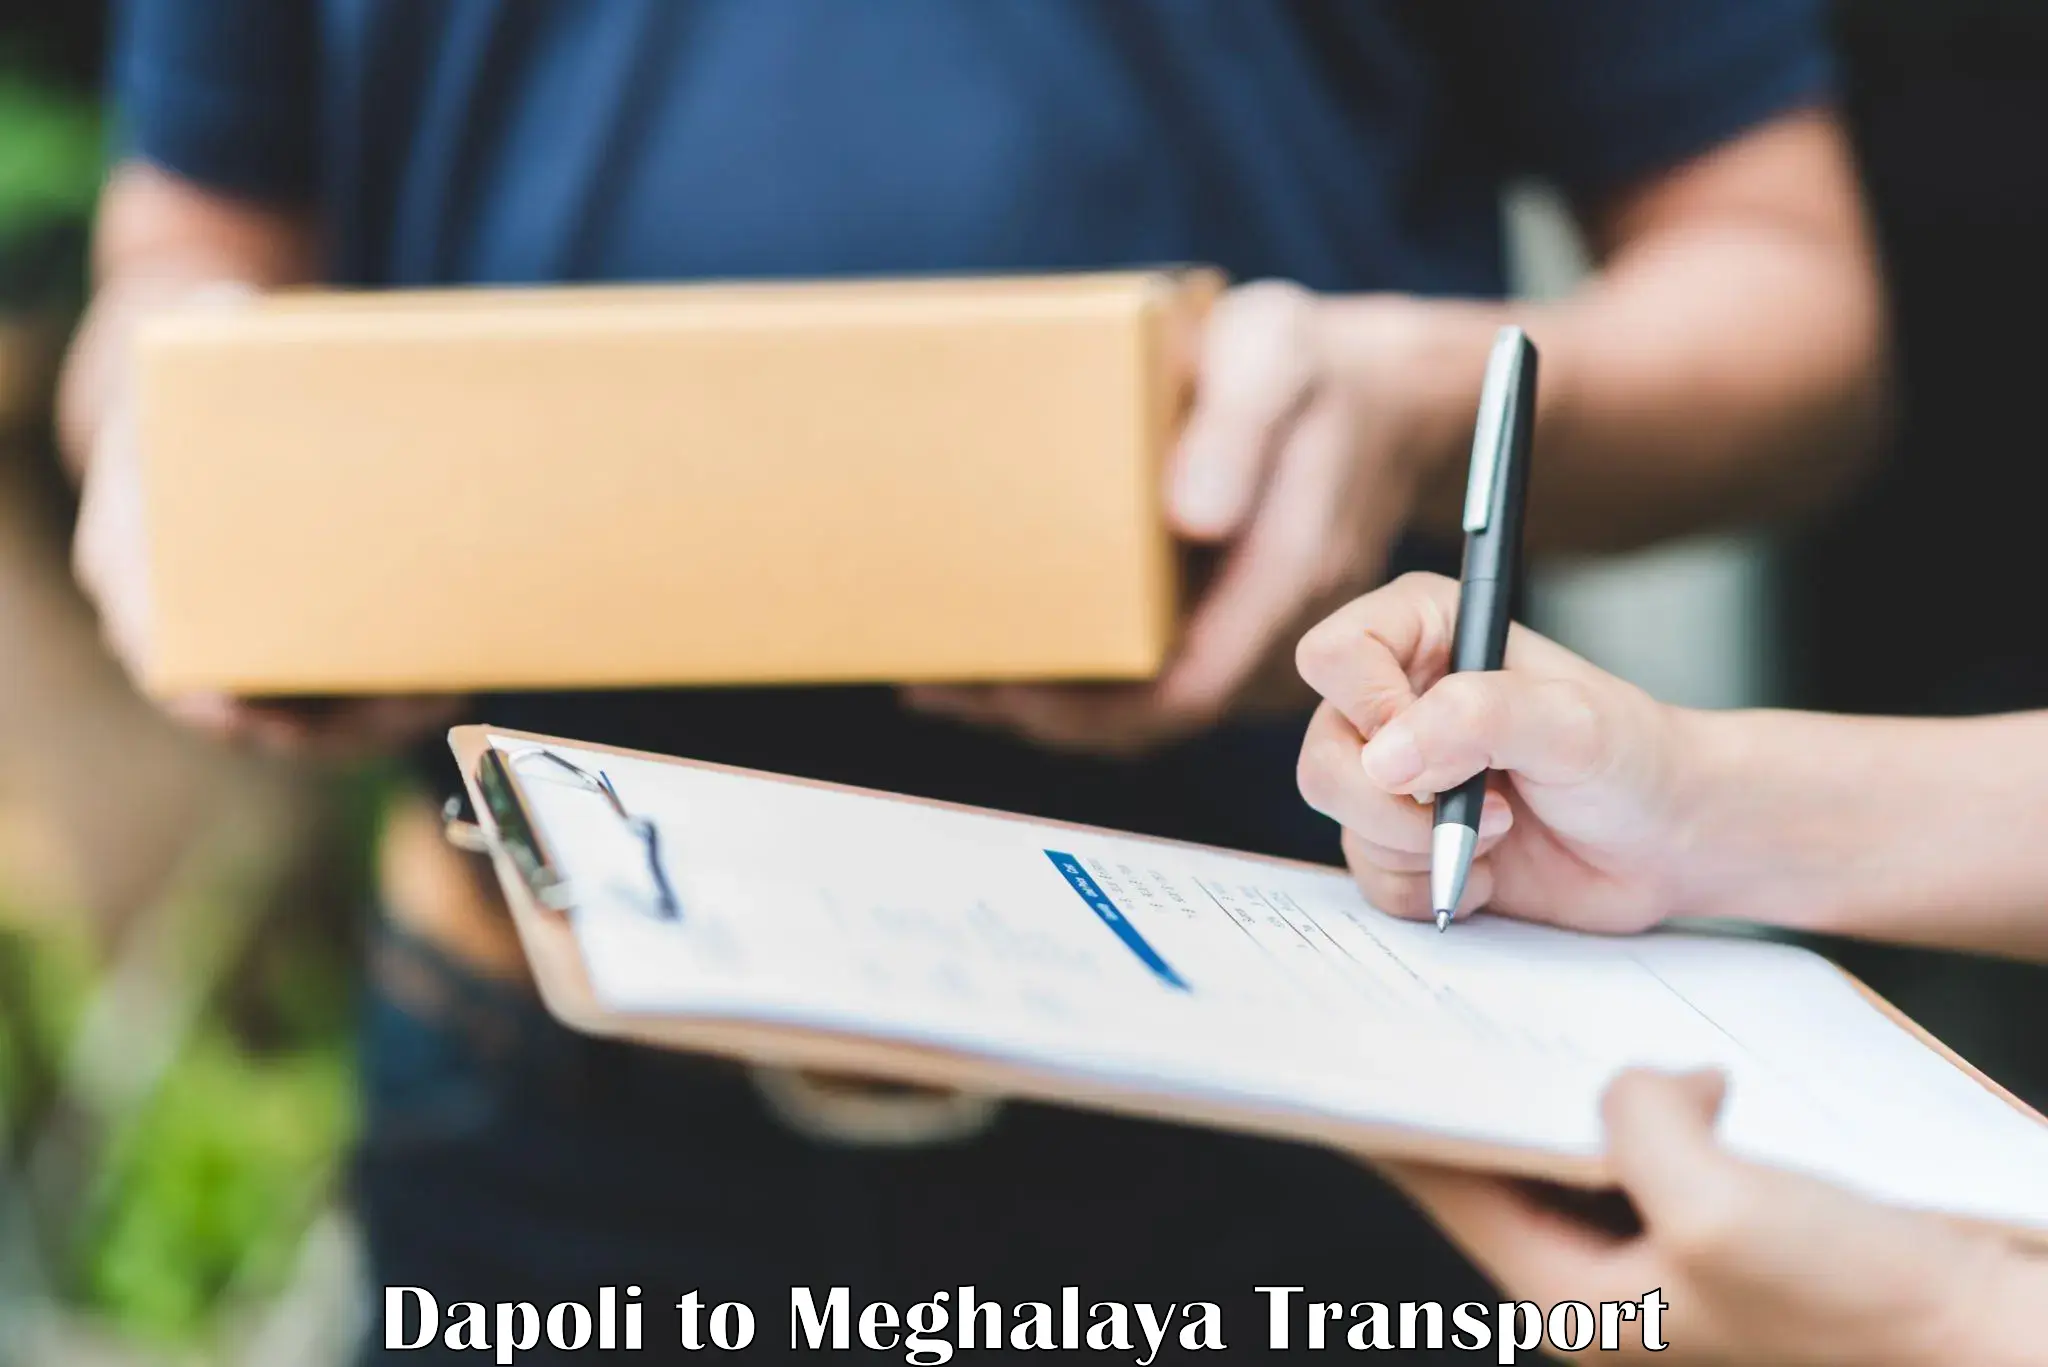 Online transport service Dapoli to Nongstoin